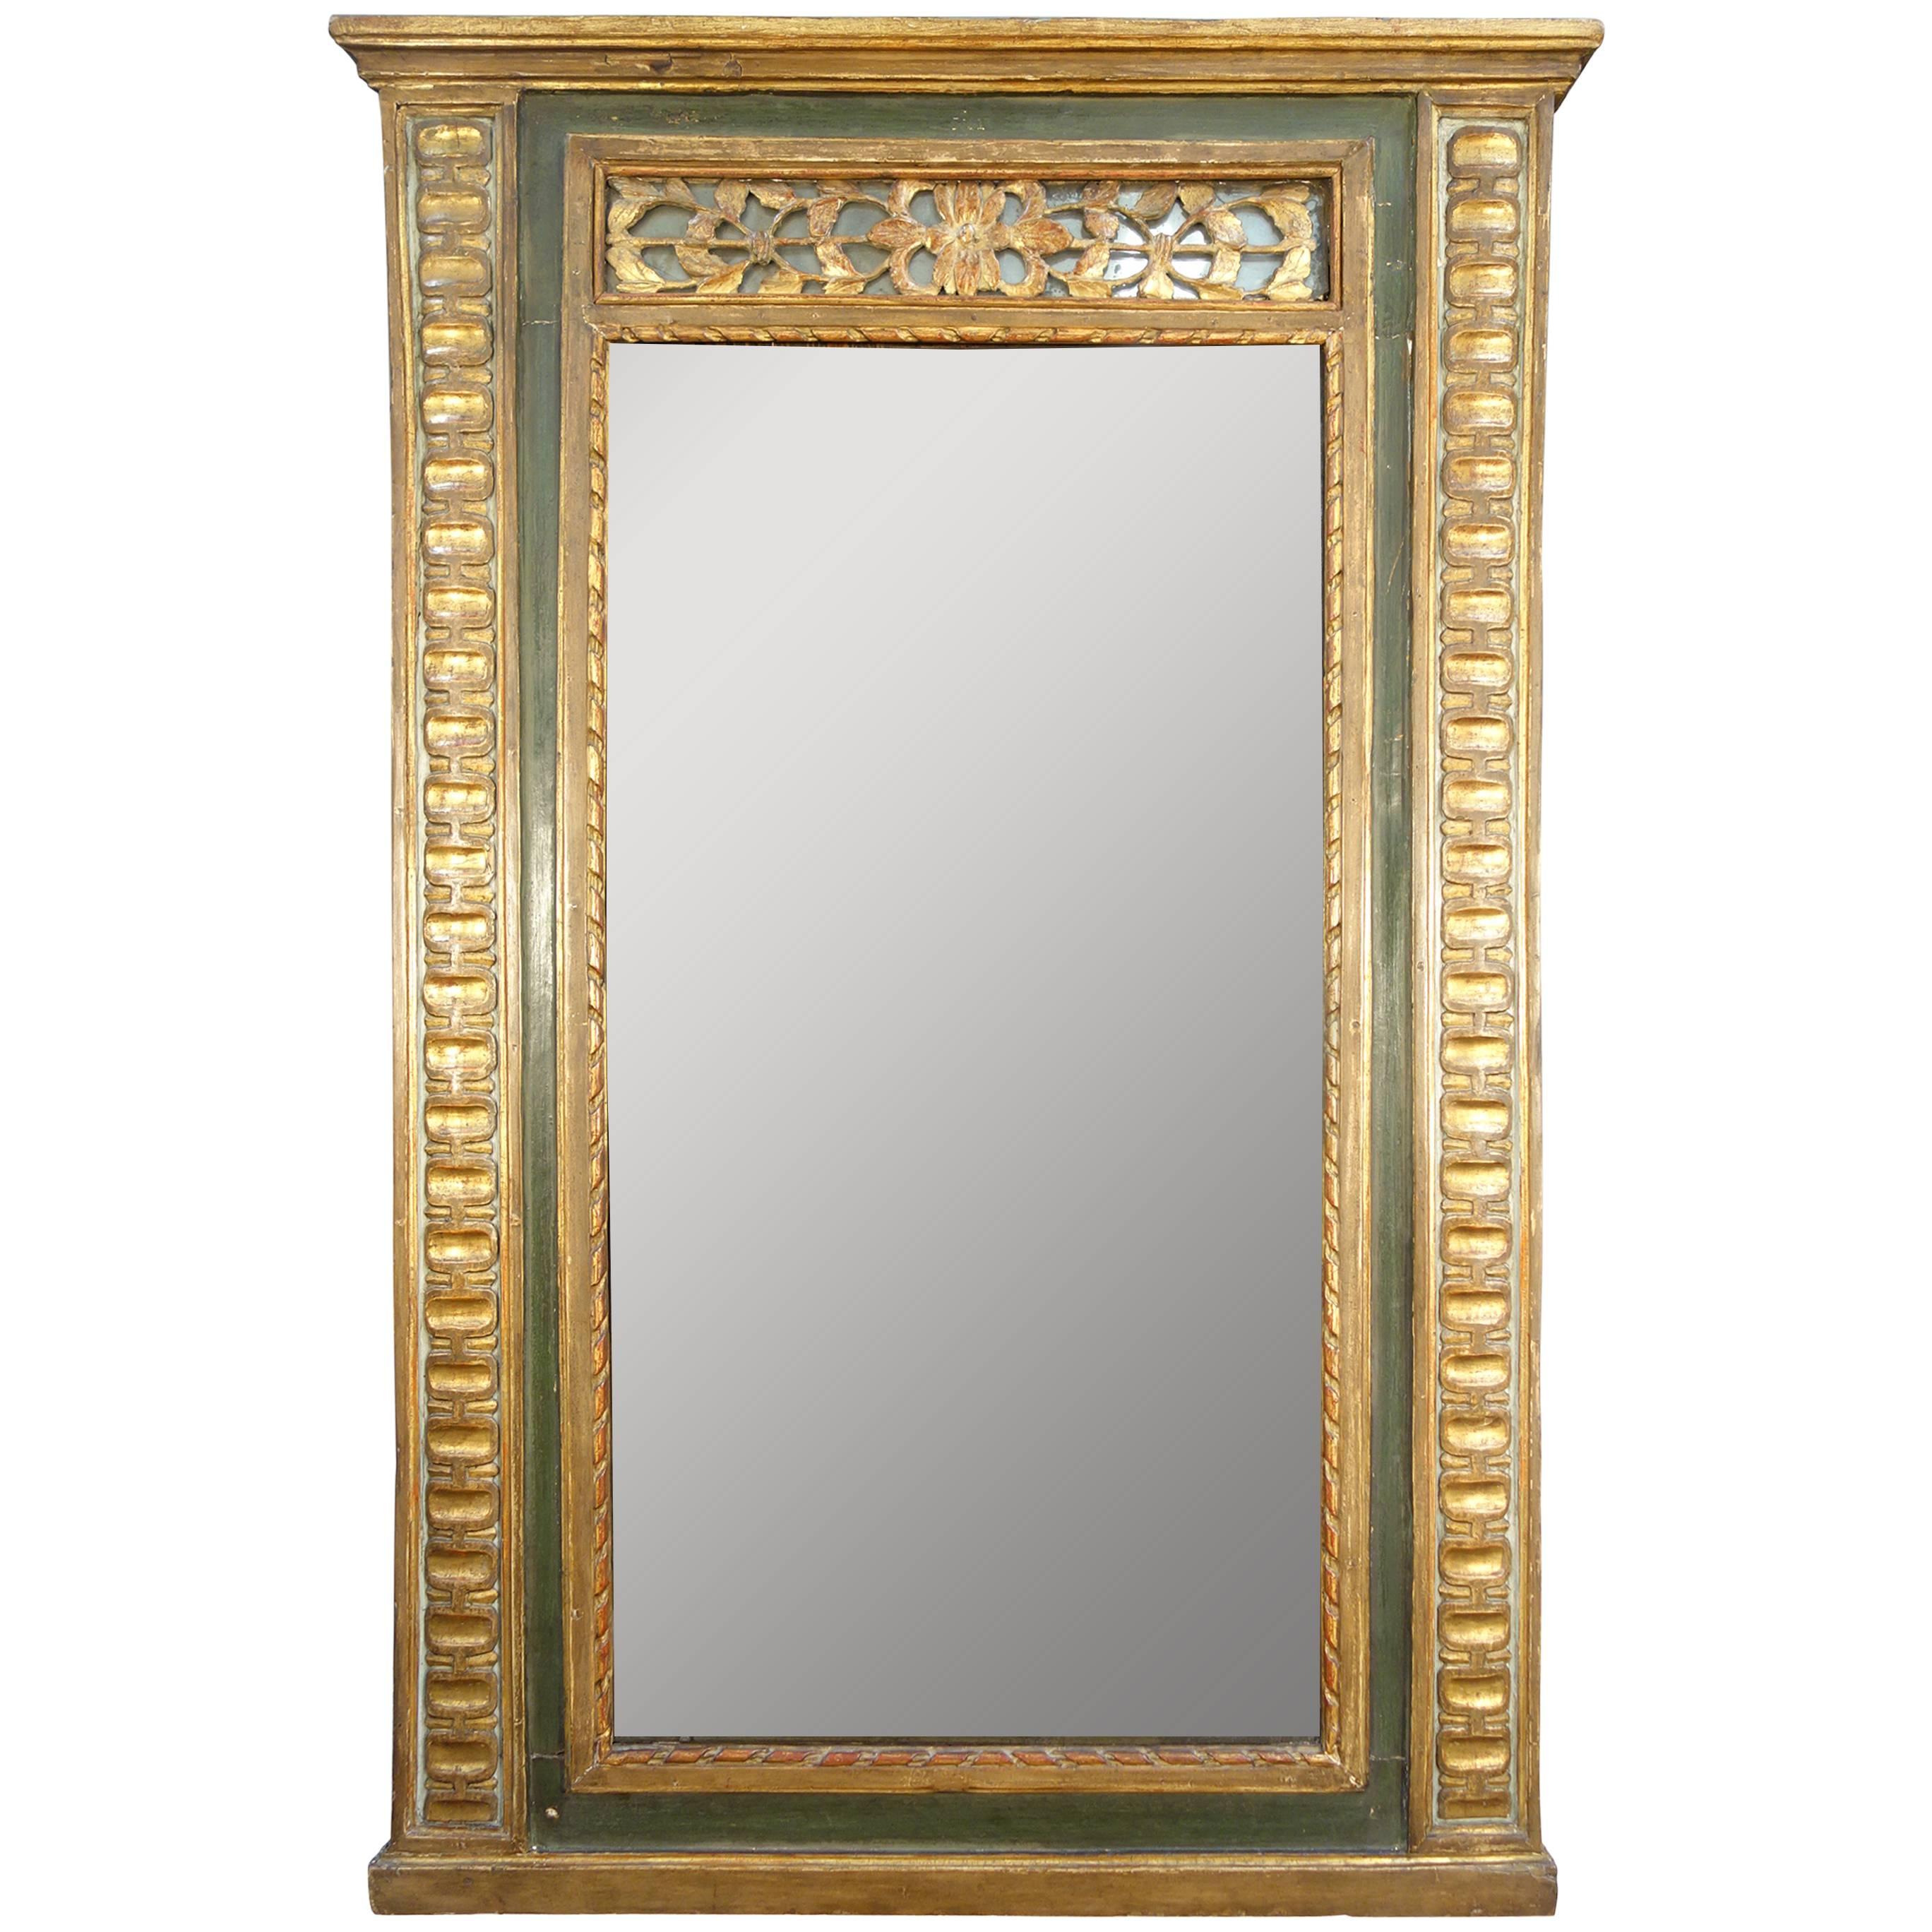 Antique Italian Gold Gilded and Painted Mirror, Early 1800s